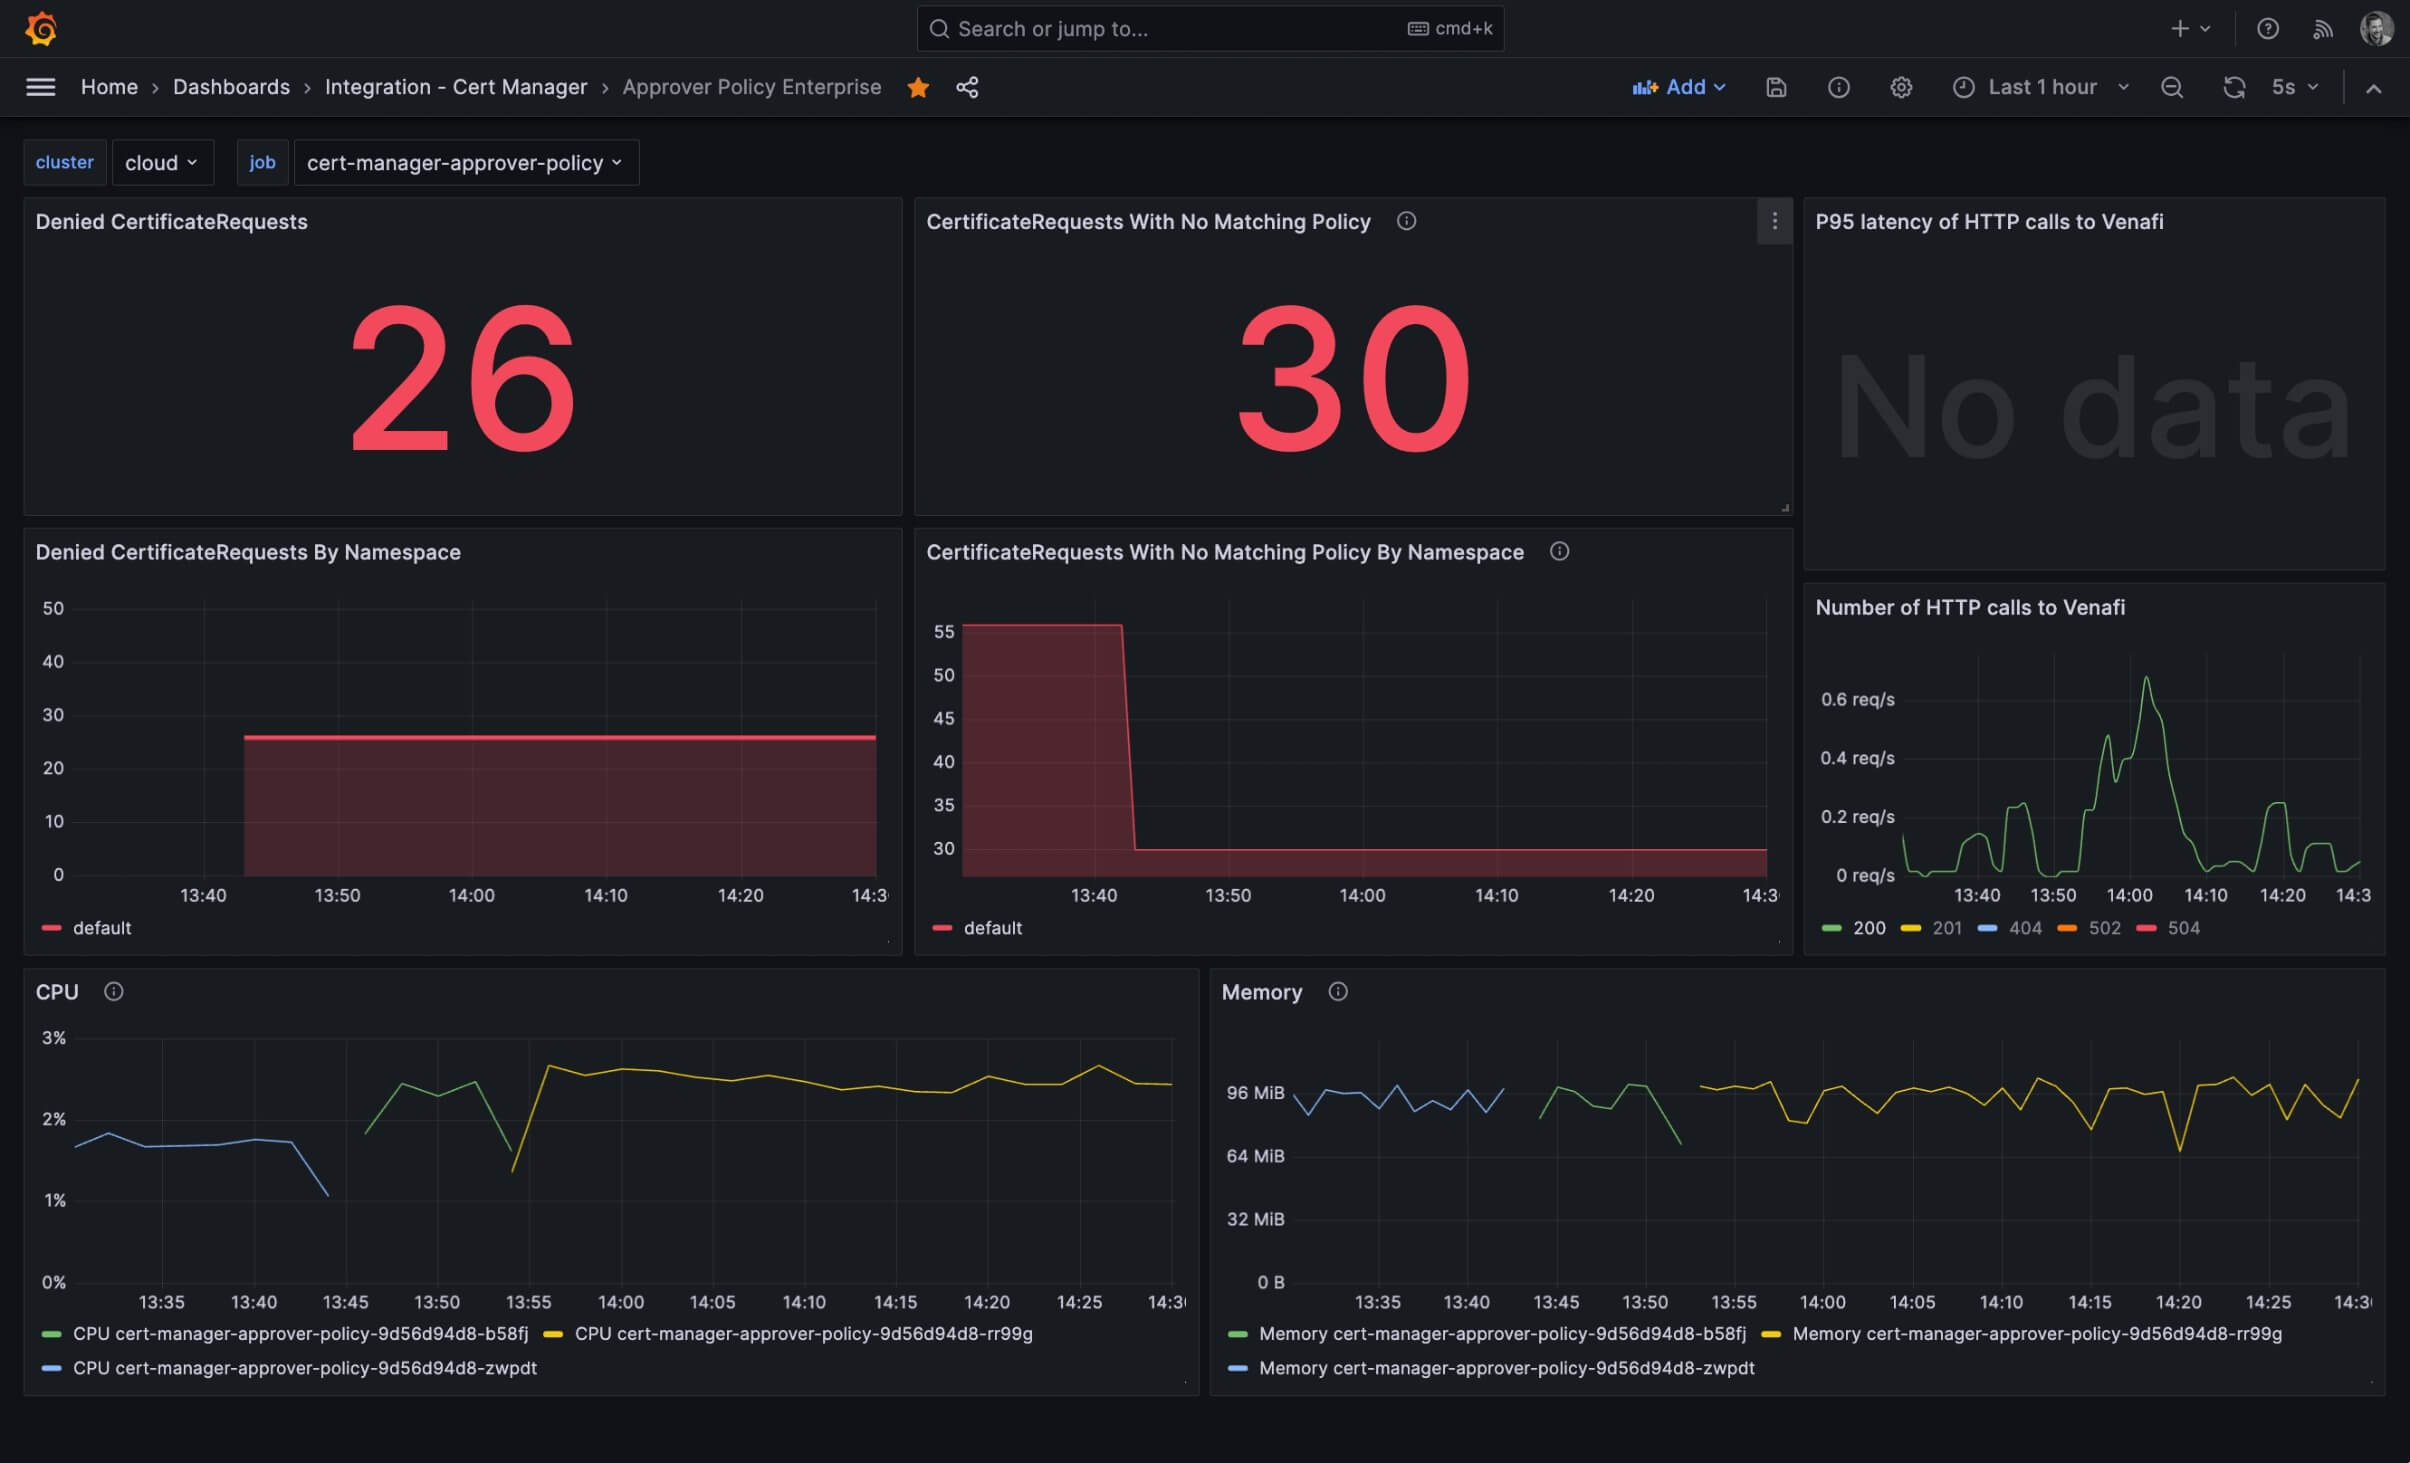 Grafana dashboard for Approver Policy Enterprise